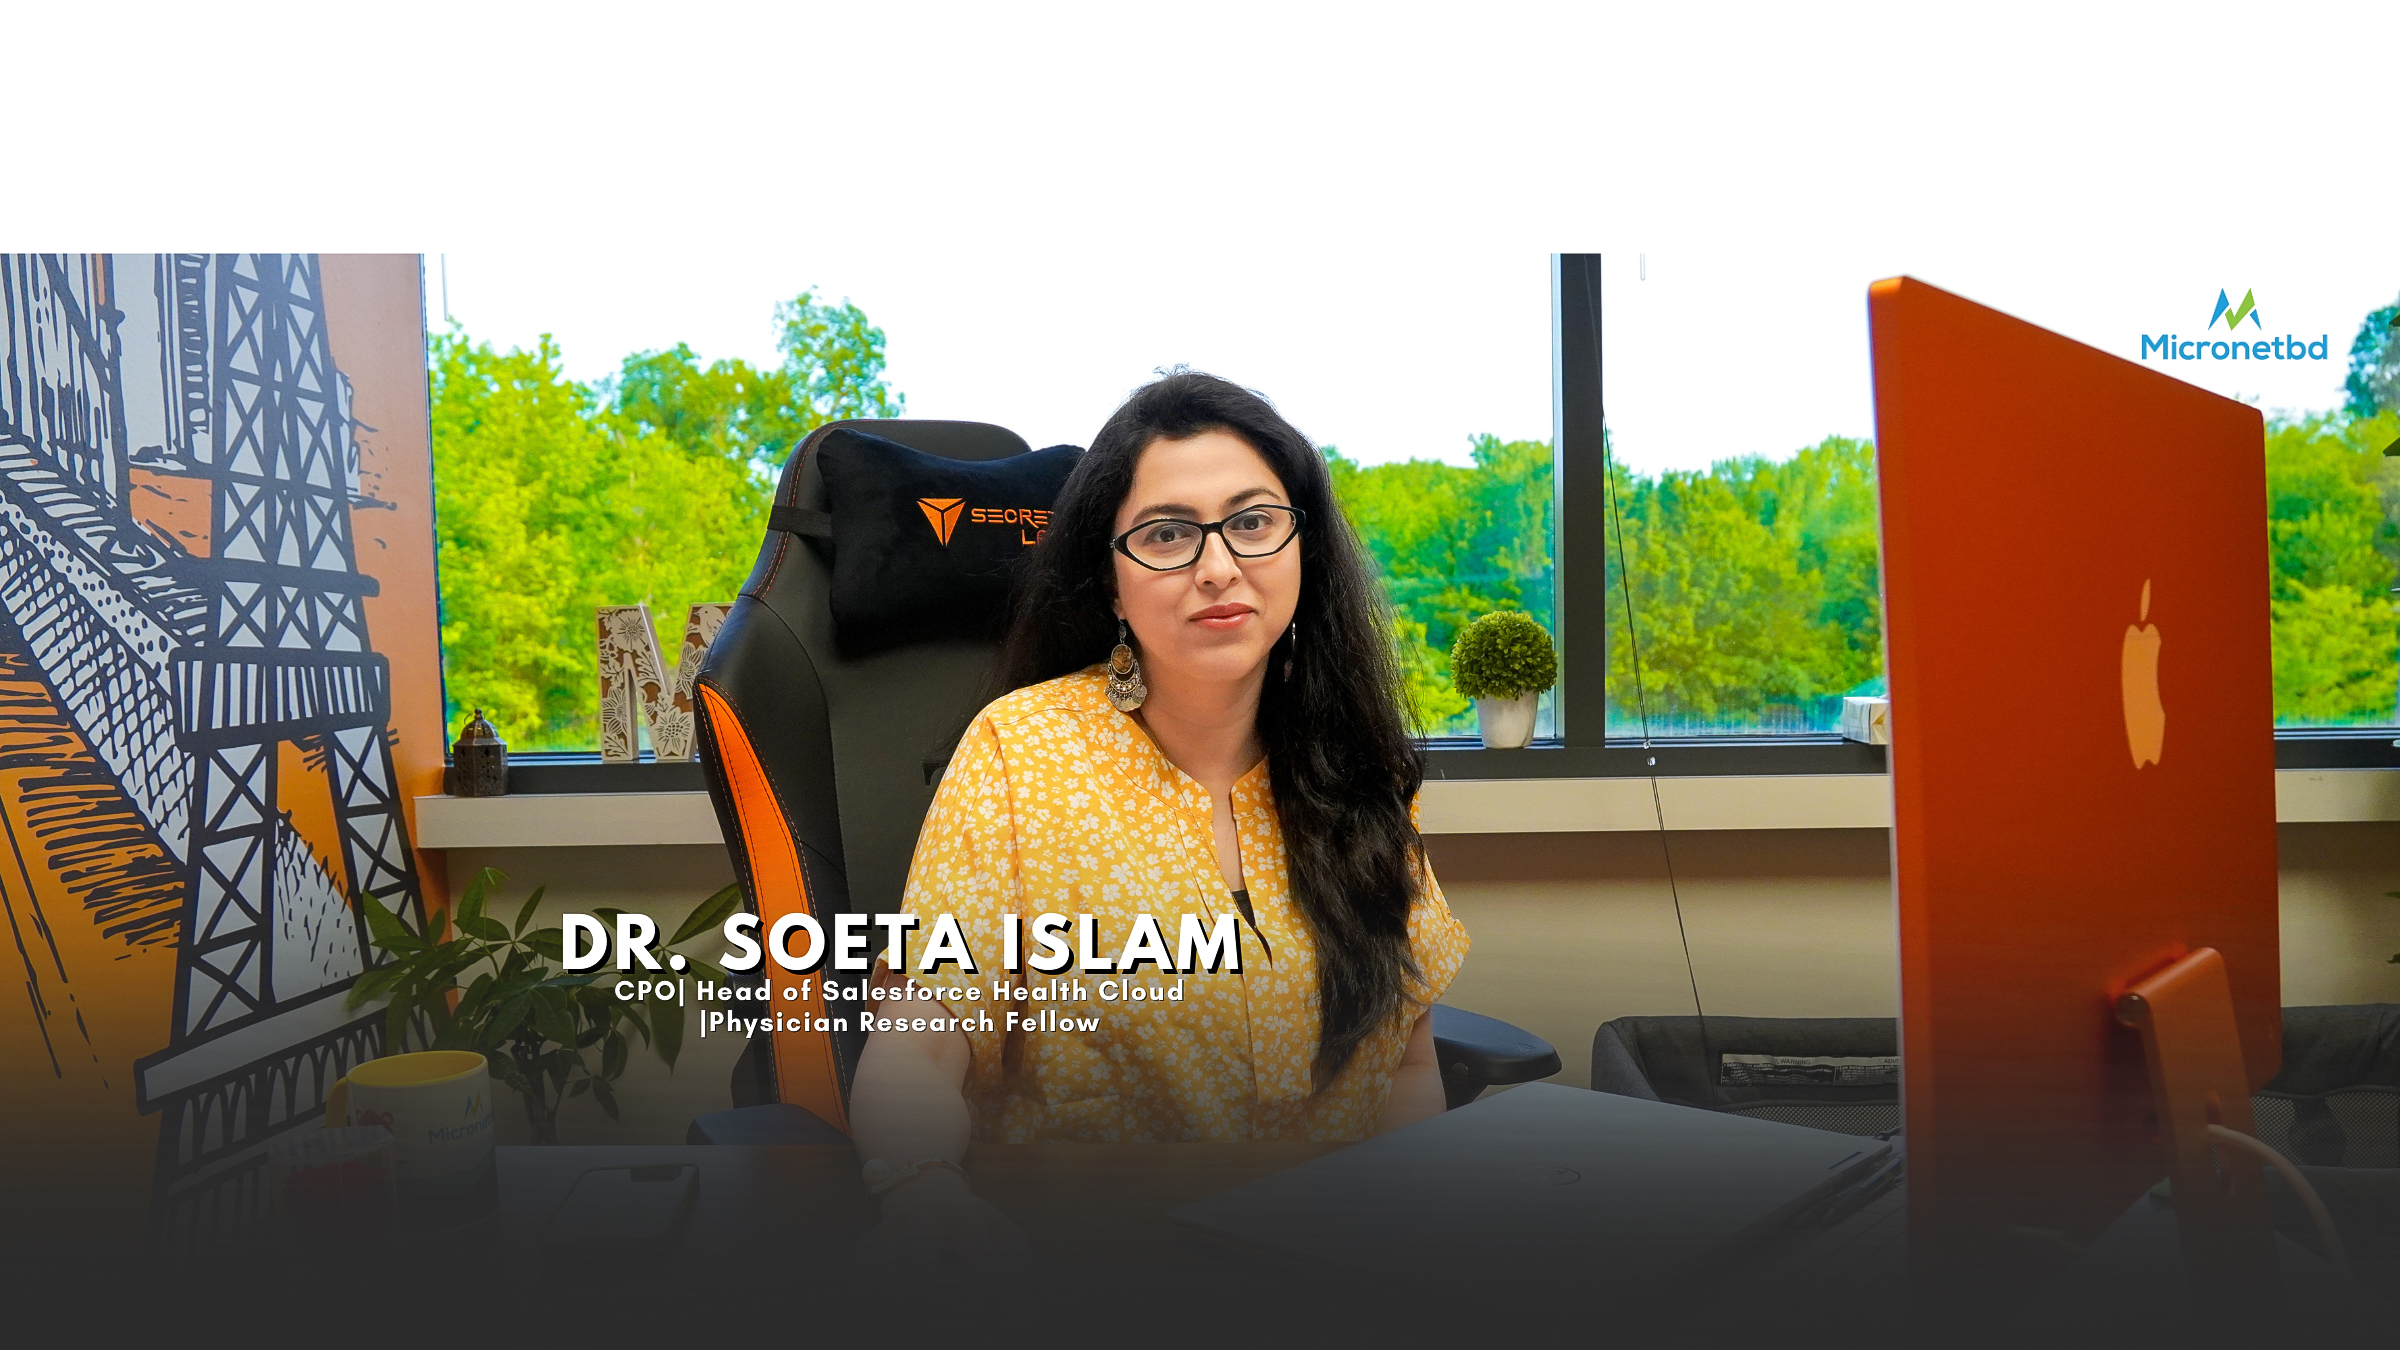 Professional woman with glasses, wearing a yellow patterned blouse, sitting in an office with a scenic view. Beside her is a desk with various items and an orange laptop. A graphic on the left depicts industrial structures, and on the right, there's a logo for 'Micronetbd'. Text overlay identifies her as 'DR. SOETA ISLAM, CPO | Head of Salesforce Health Cloud | Physician Research Fellow